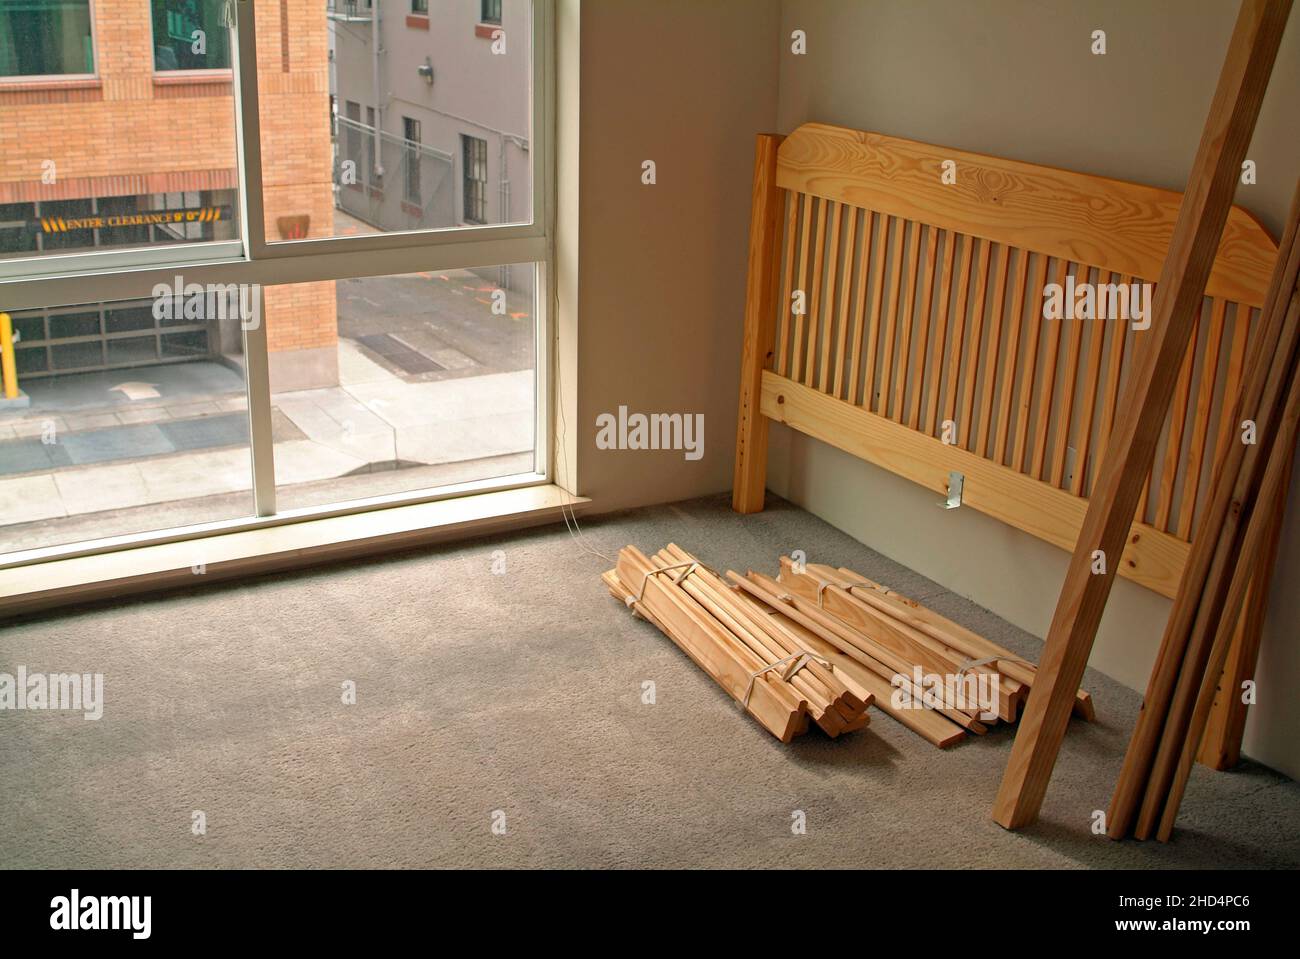 Dissasembled bed in empty urban apartment. Stock Photo